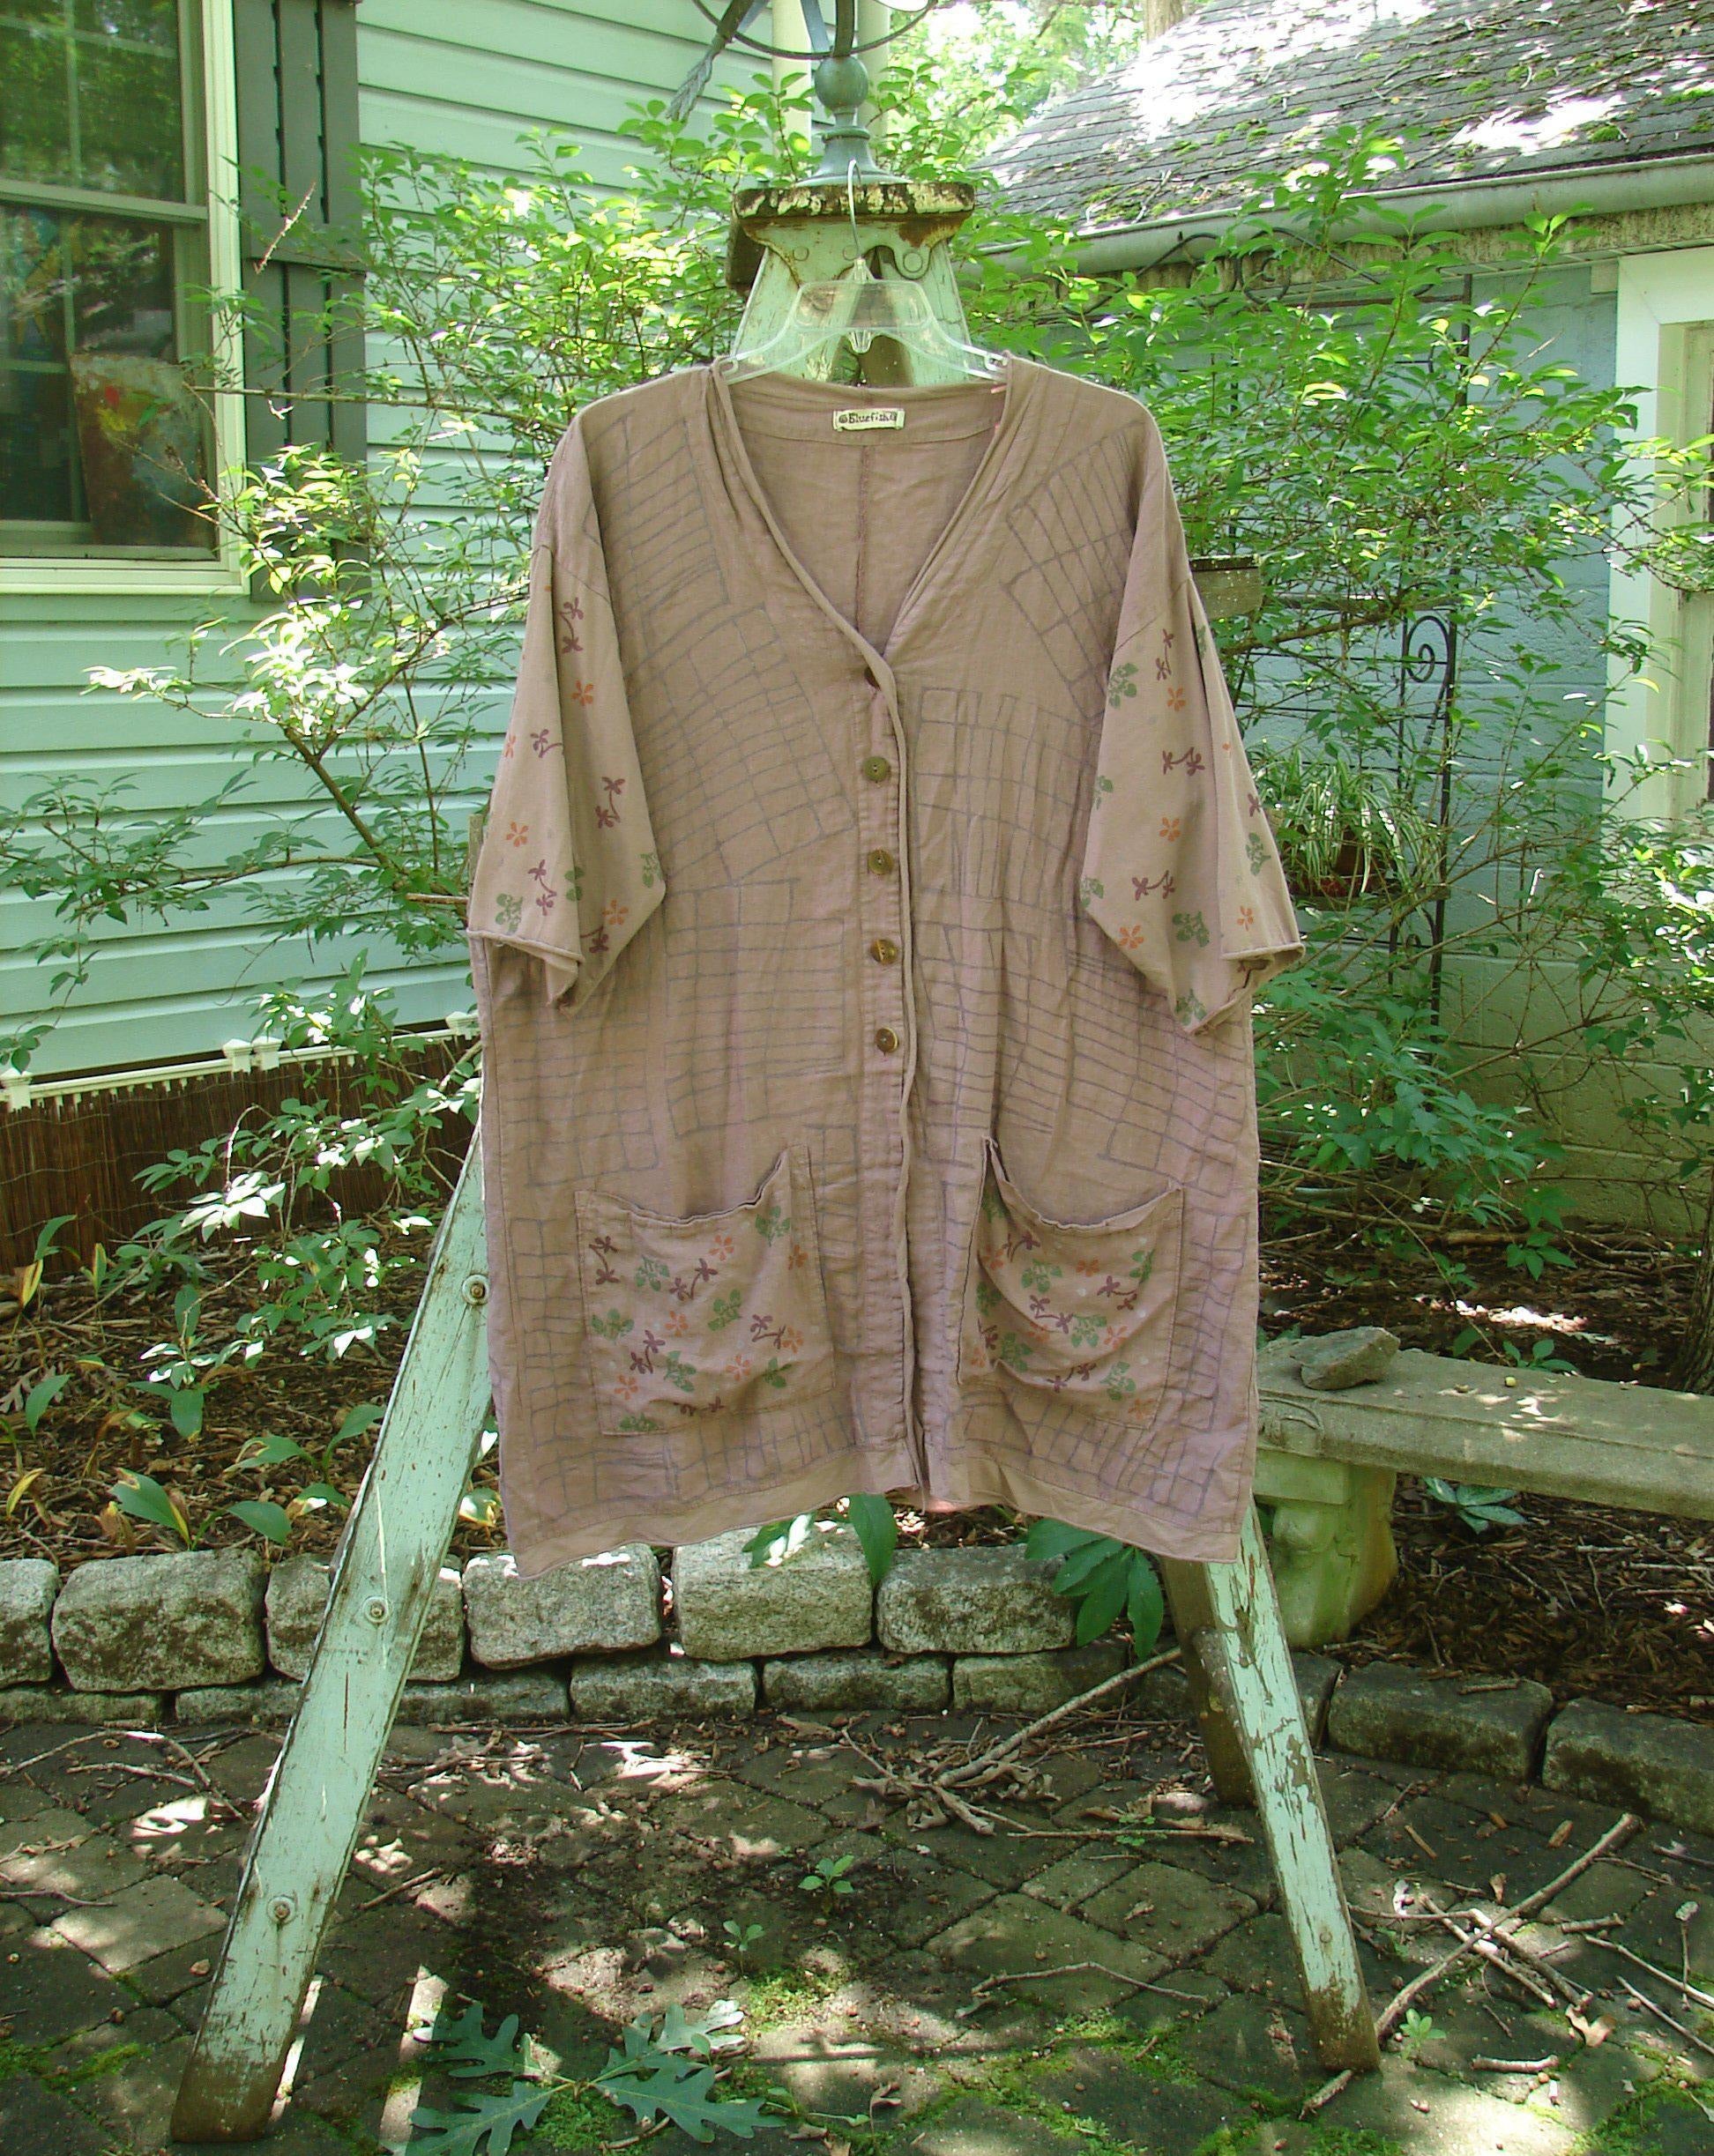 Barclay Linen Cotton Sleeve Pocket Cardigan Rich Mauve Size 0: A shirt with a floral design on a clothes rack.